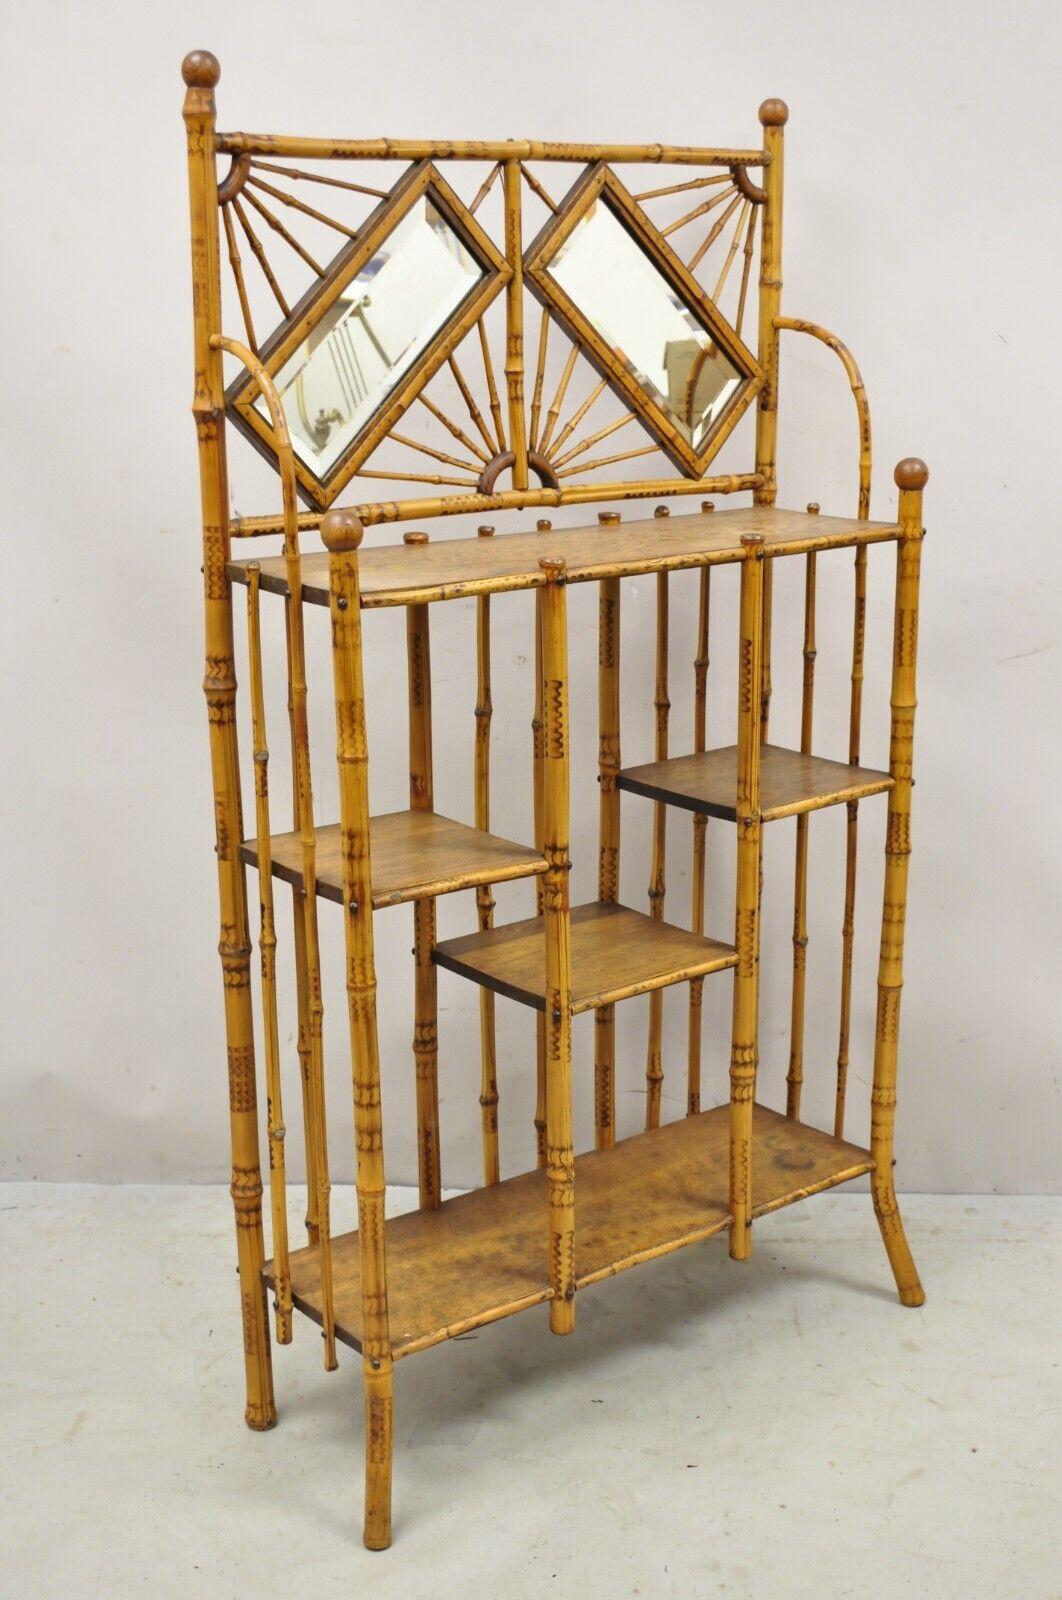 19th Century English Victorian Bamboo Stick and Ball Curio Shelf Display Etagere w/ Mirror. Item features 2 beveled glass mirrors, bamboo wood construction, ornate fretwork stick and ball design, 5 wooden shelves, very nice antique item, quality